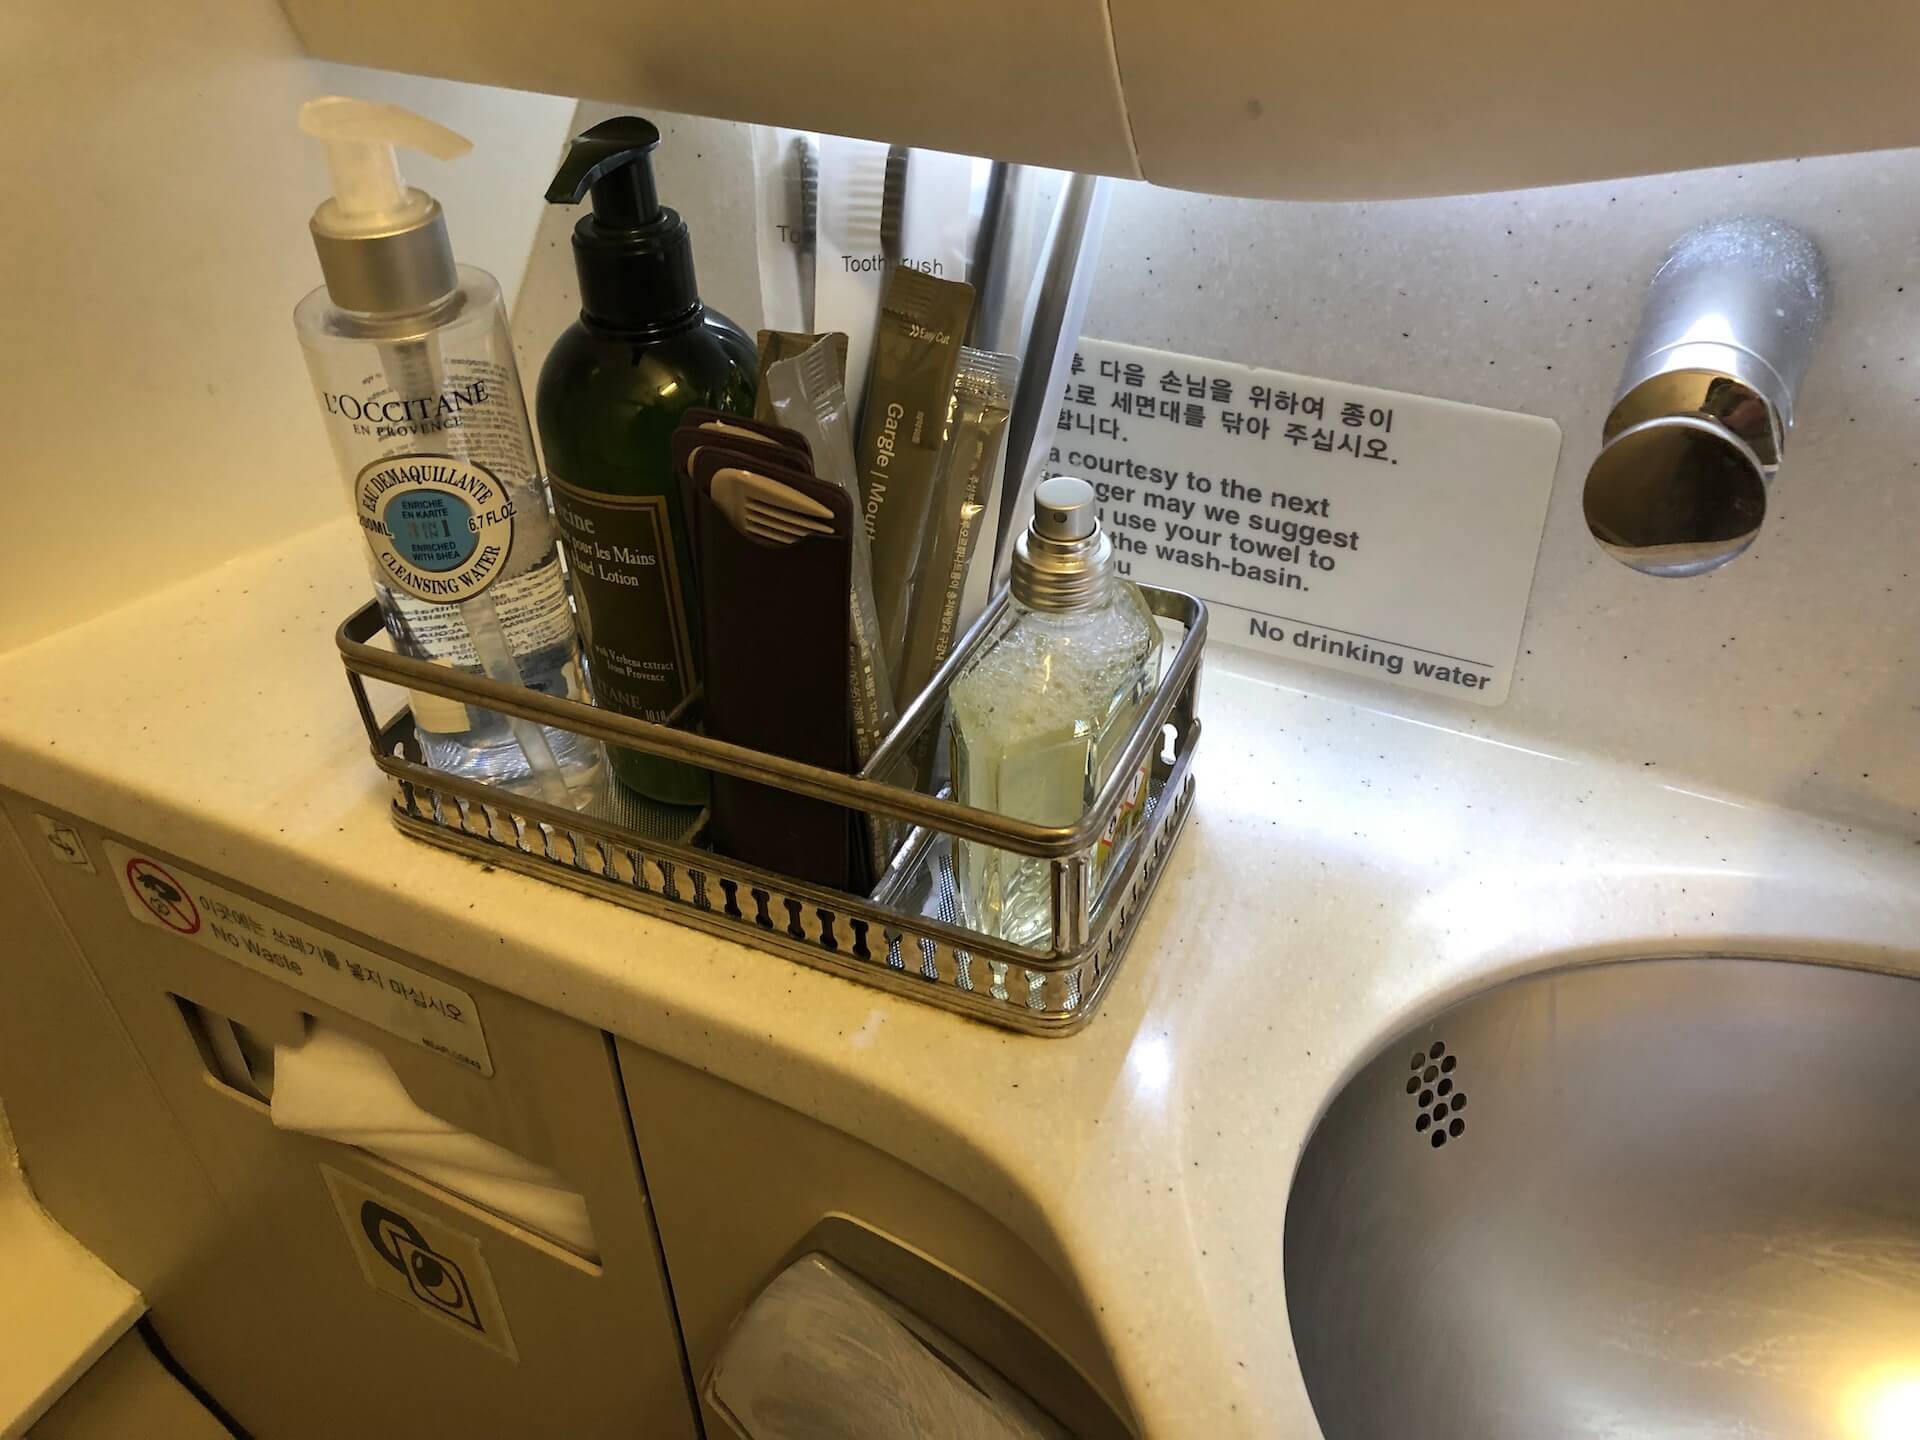 Asiana Airbus A330 Business Class Amenities Toilette